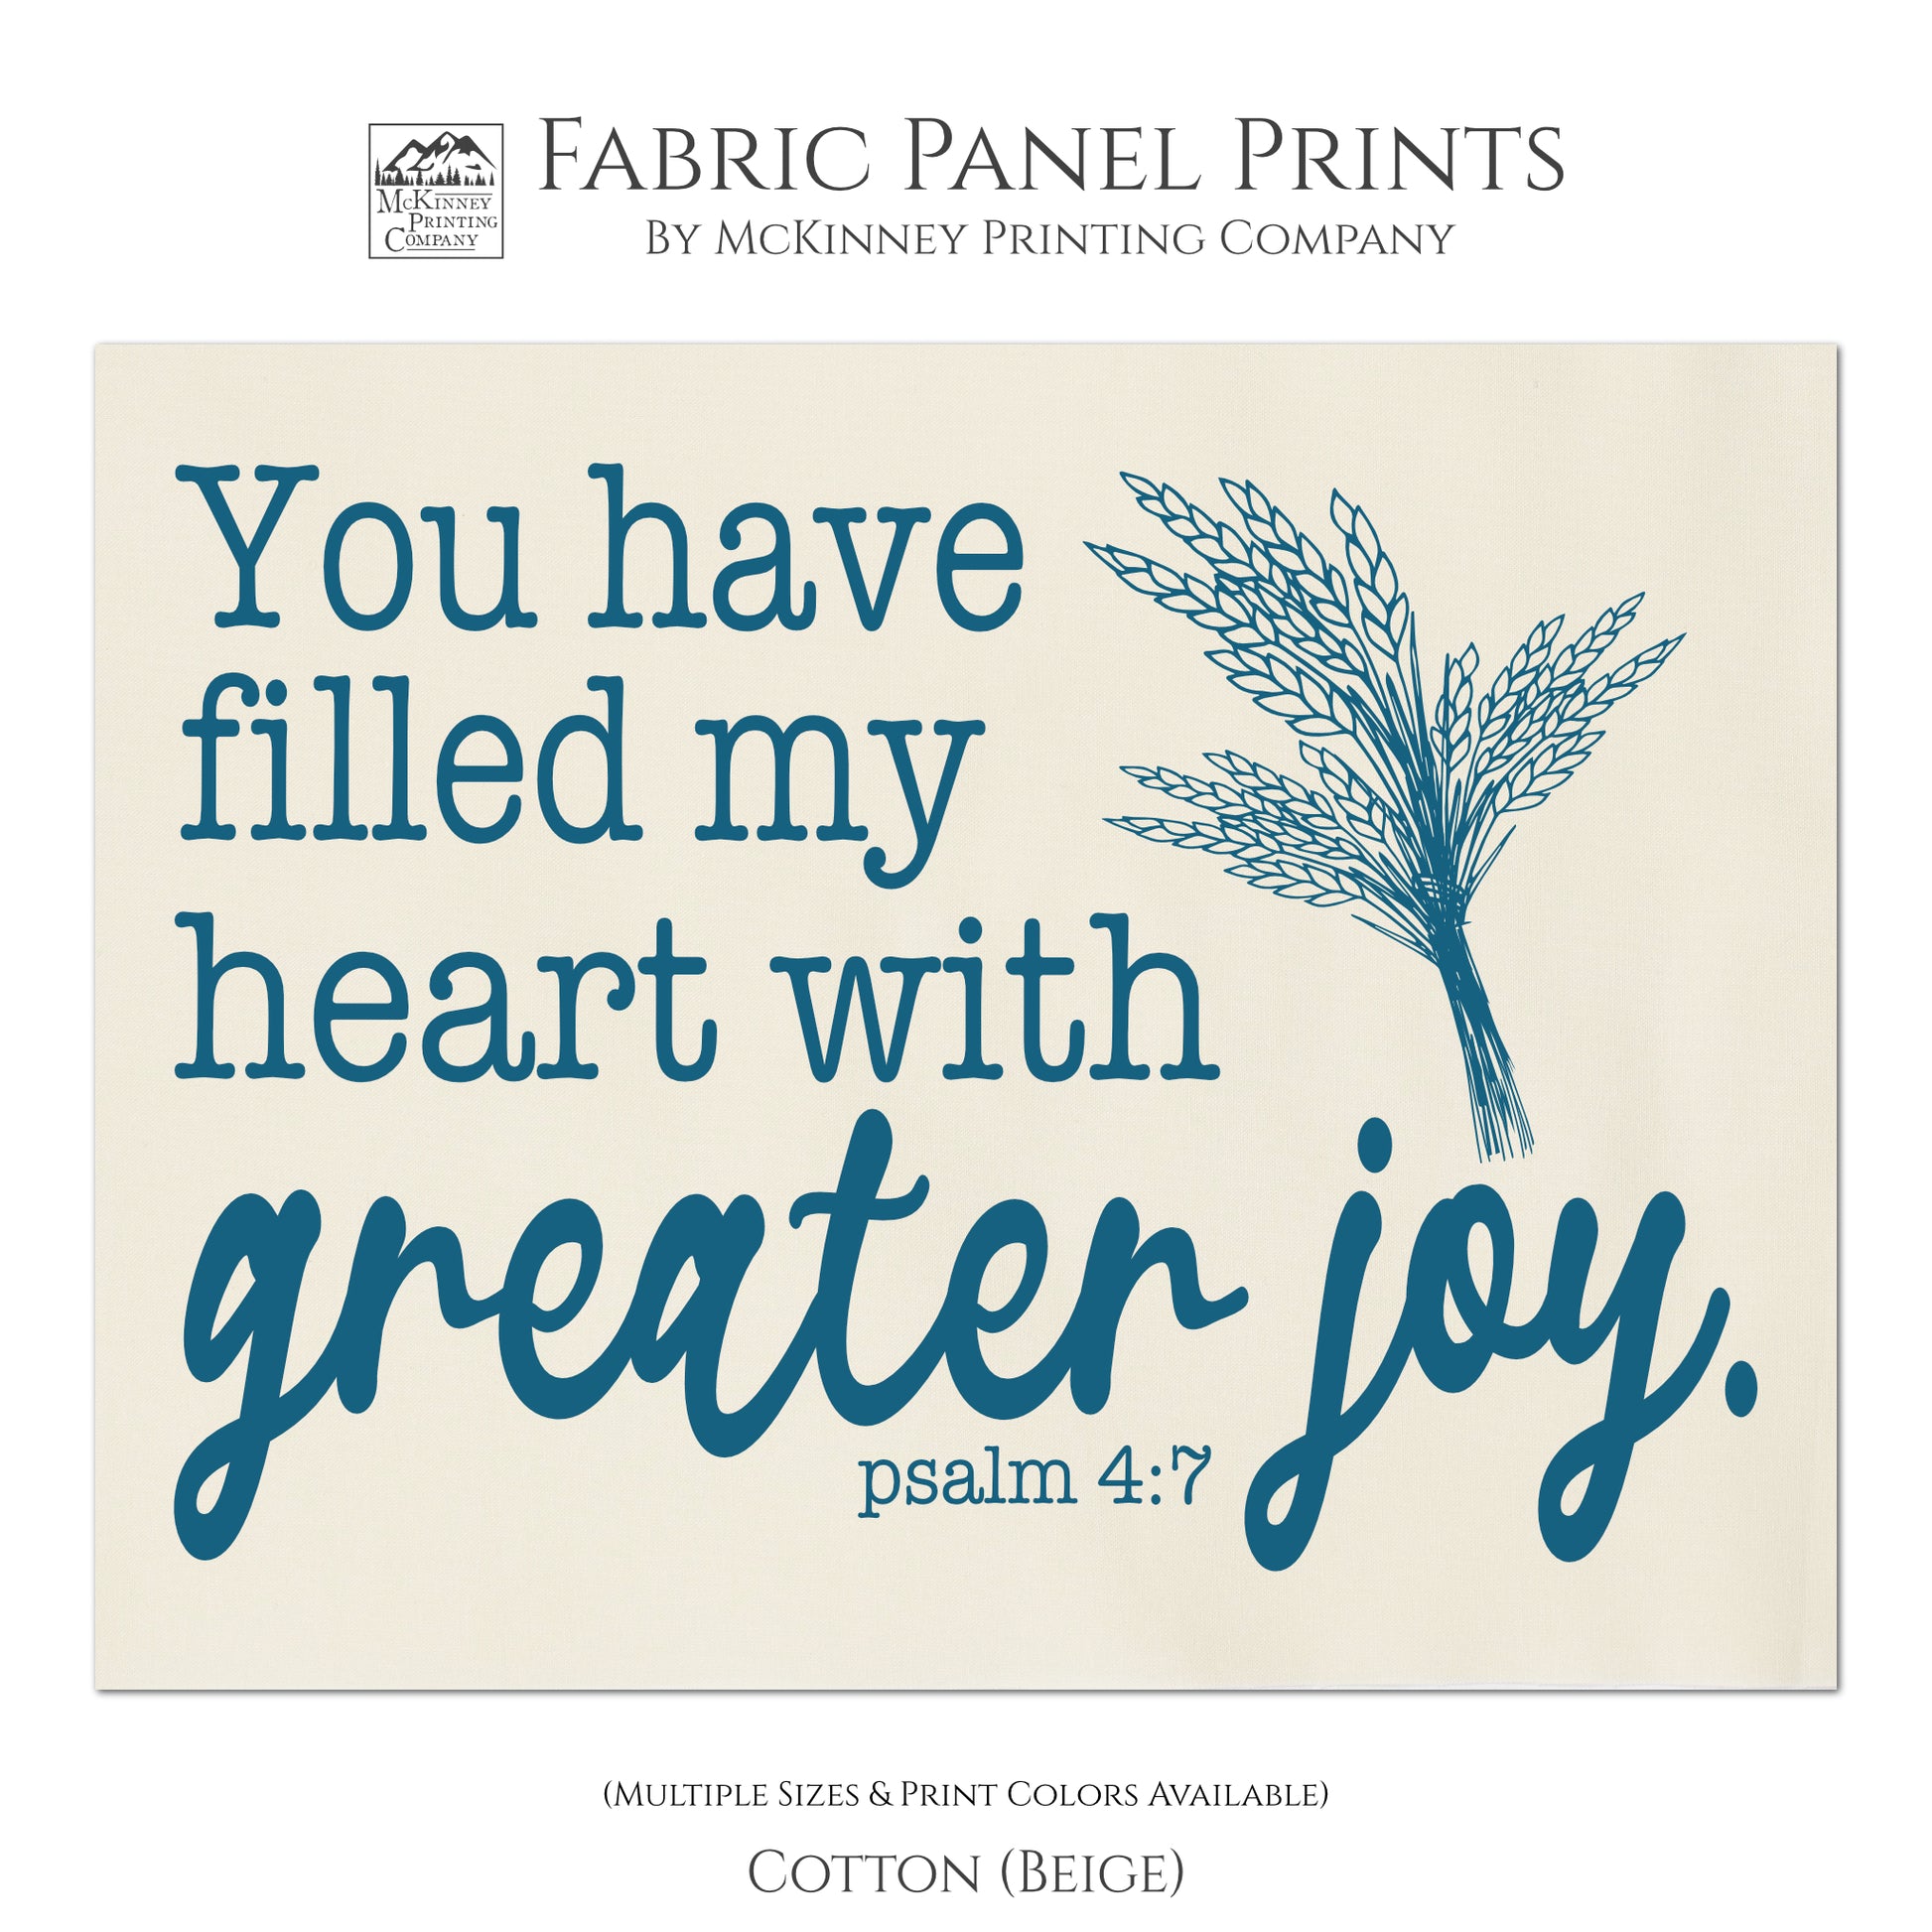 You have filled my heart with greater joy - Psalm 4 7, Scripture Fabric, Religious Fabric, Quilt Block, Wall Hanging, Fabric Panel Print - Cotton